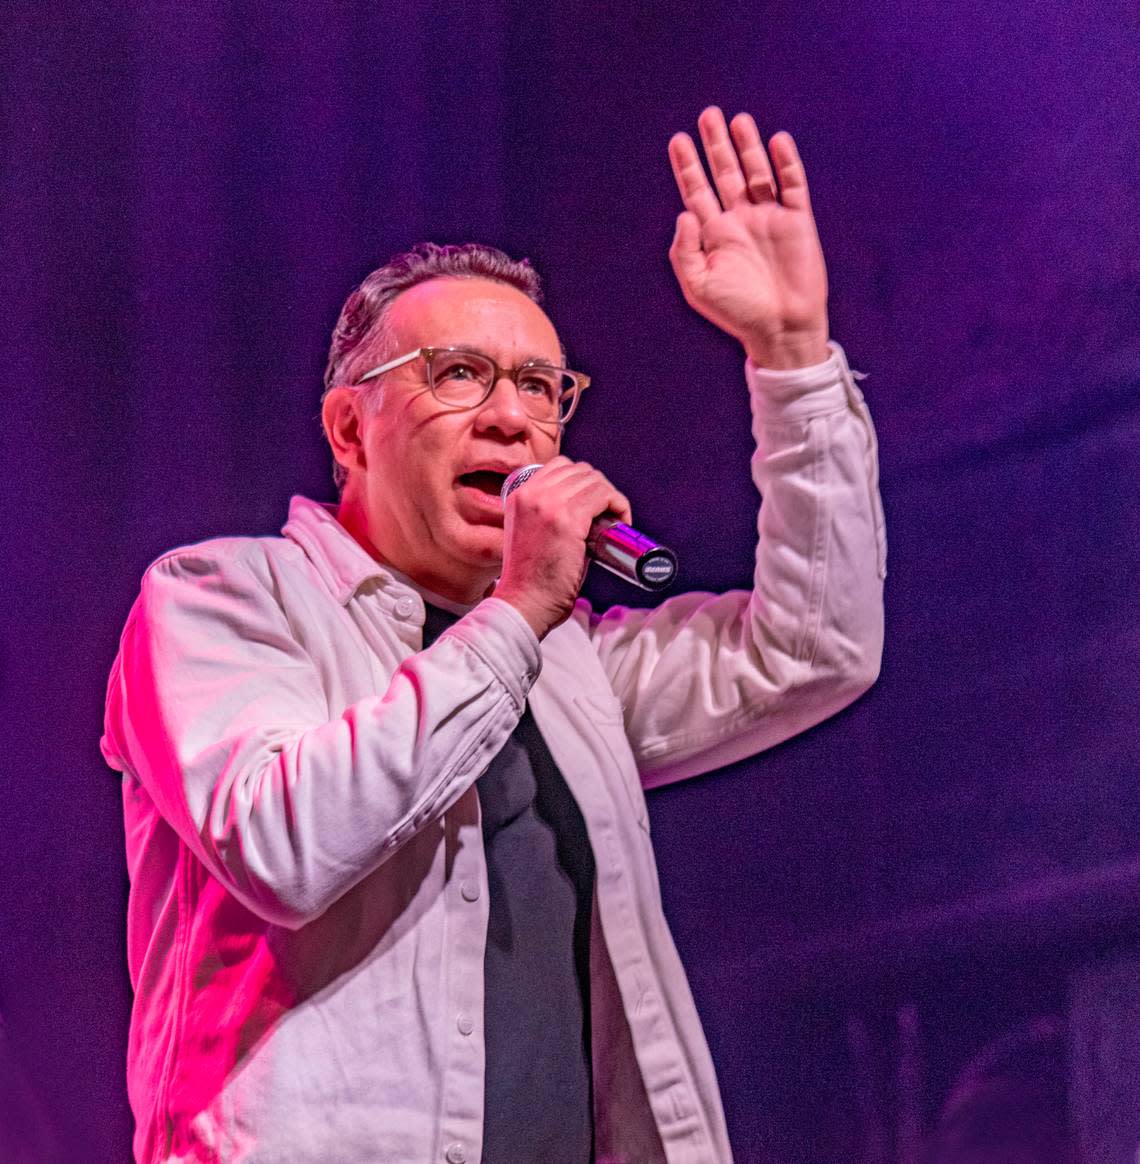 “I come back to Thundergong! because — well, obviously for the cause — and it’s also because I love this city,” says Fred Armisen, who showed off his music talents as well as comedy.